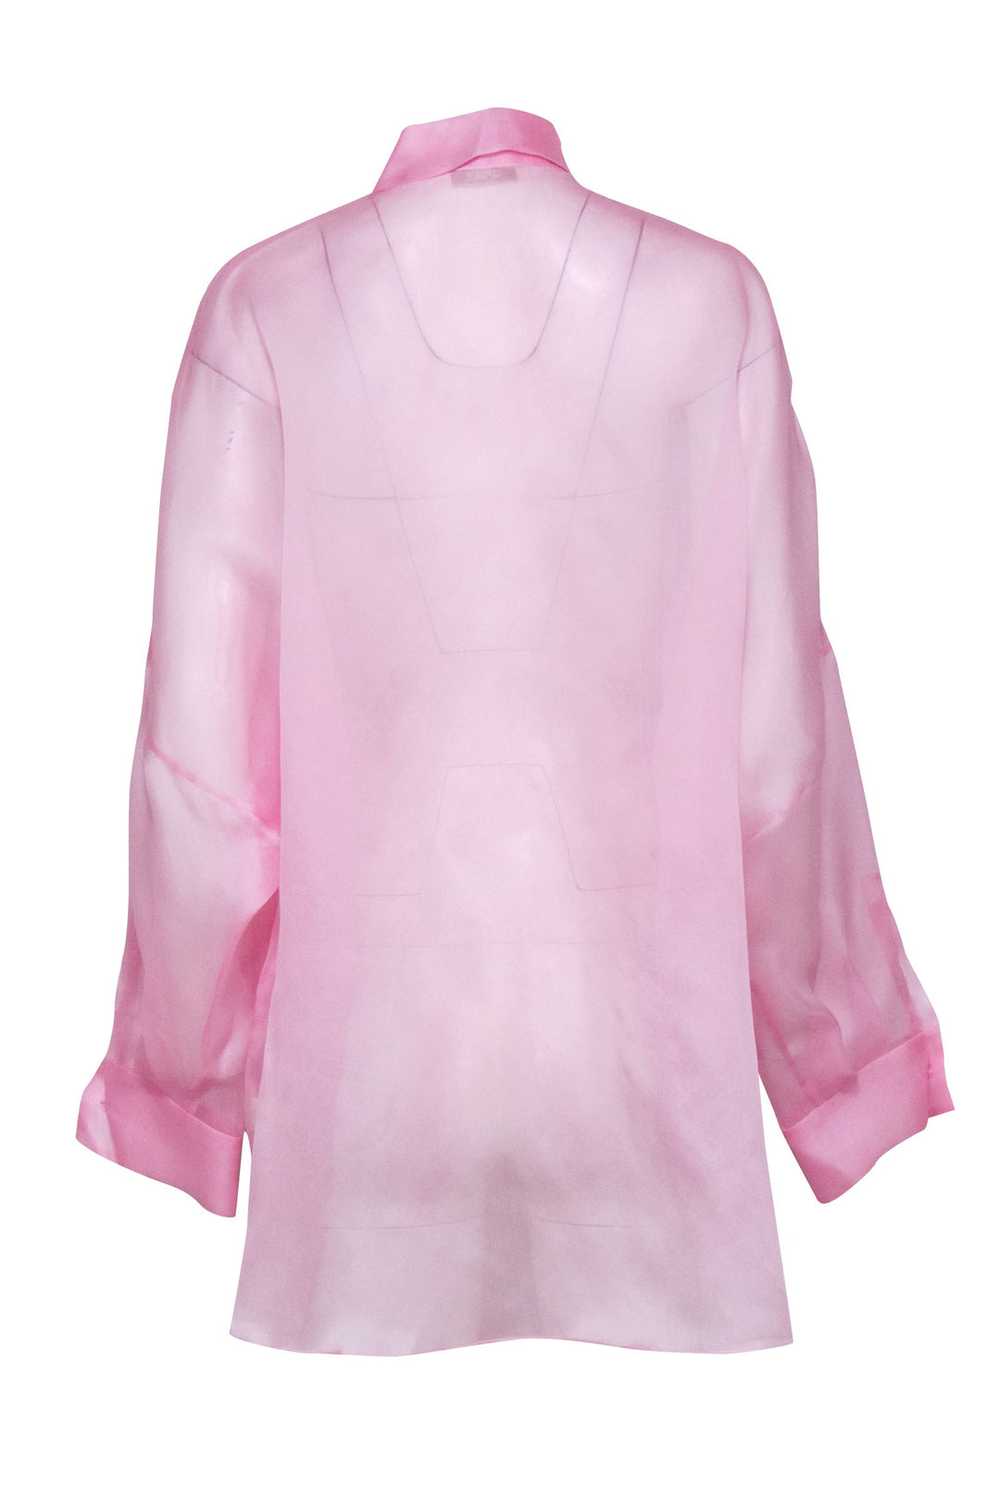 Lapointe - Pink Silk Sheer Button-Up Oversized Bl… - image 3